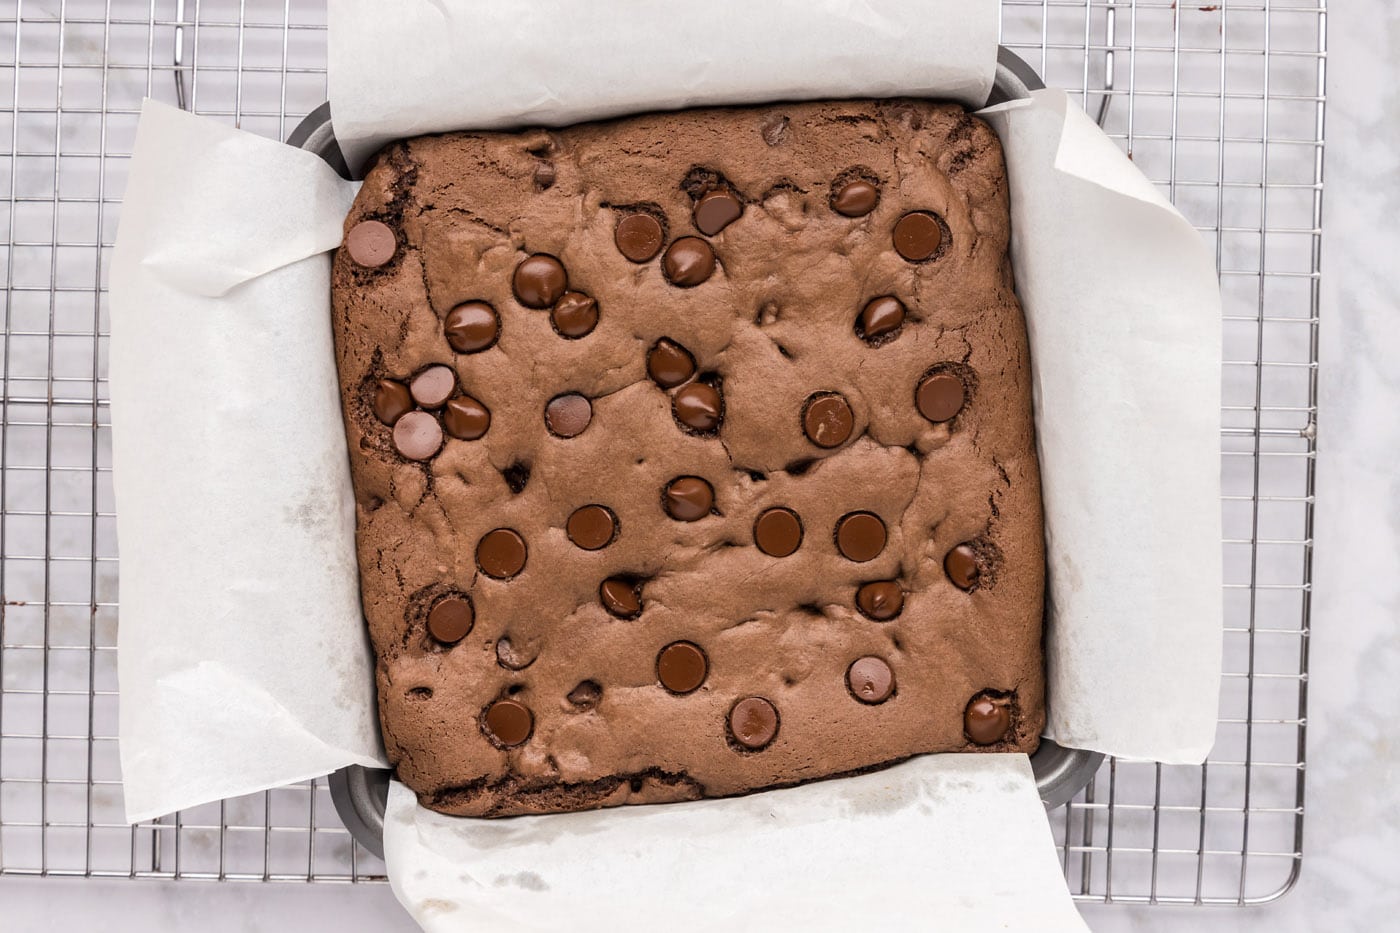 baked cake mix brownies with chocolate chips